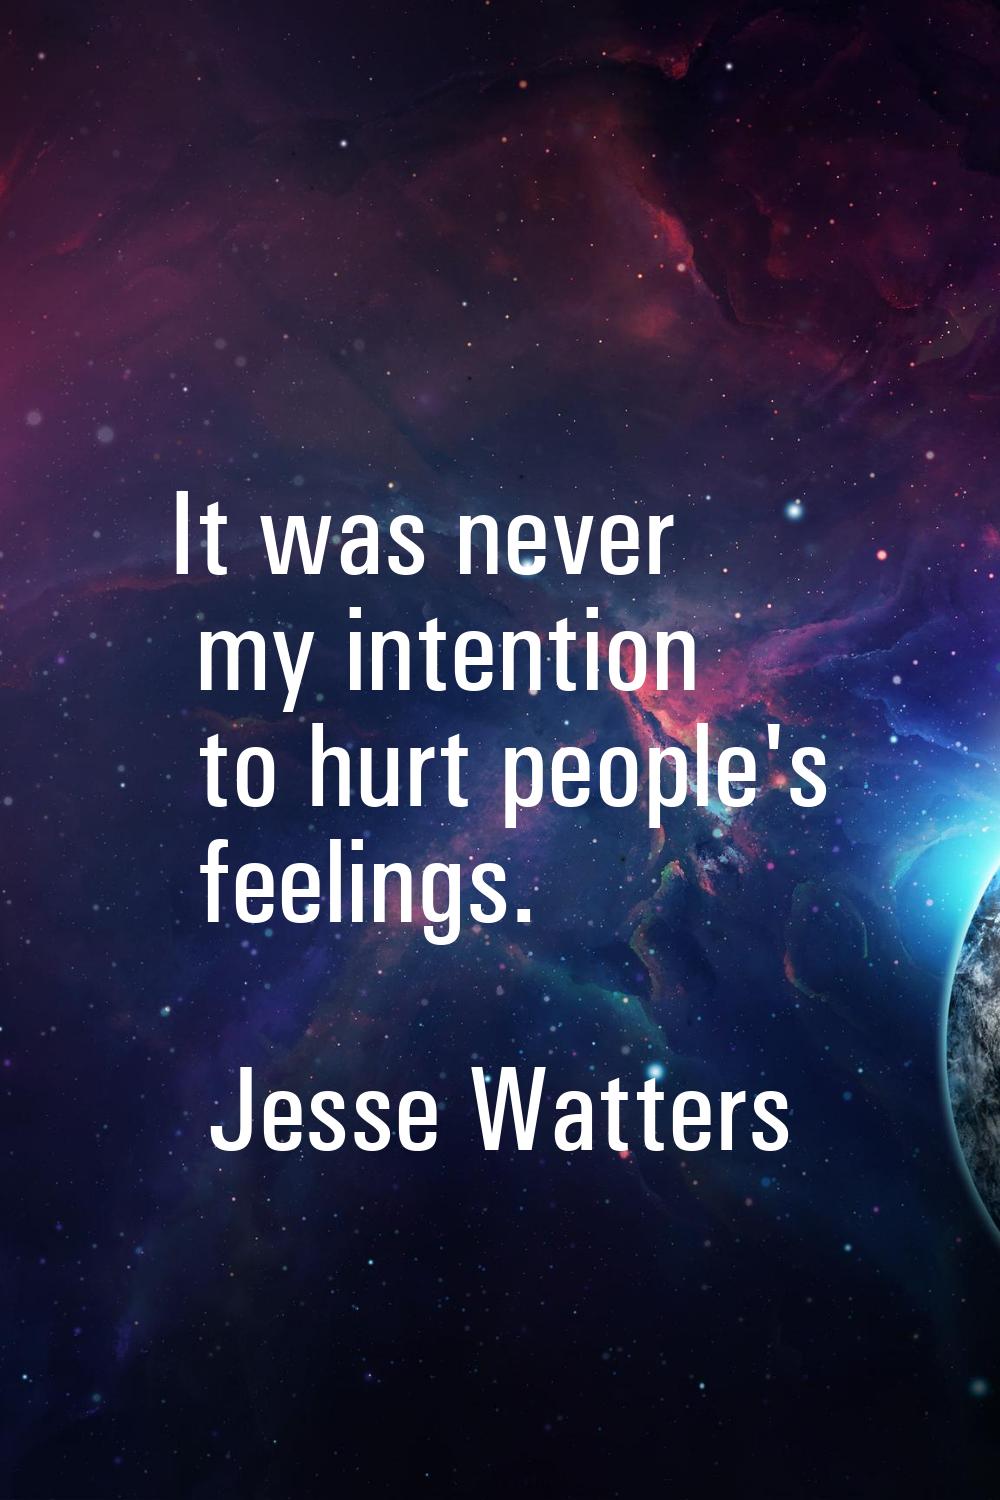 It was never my intention to hurt people's feelings.